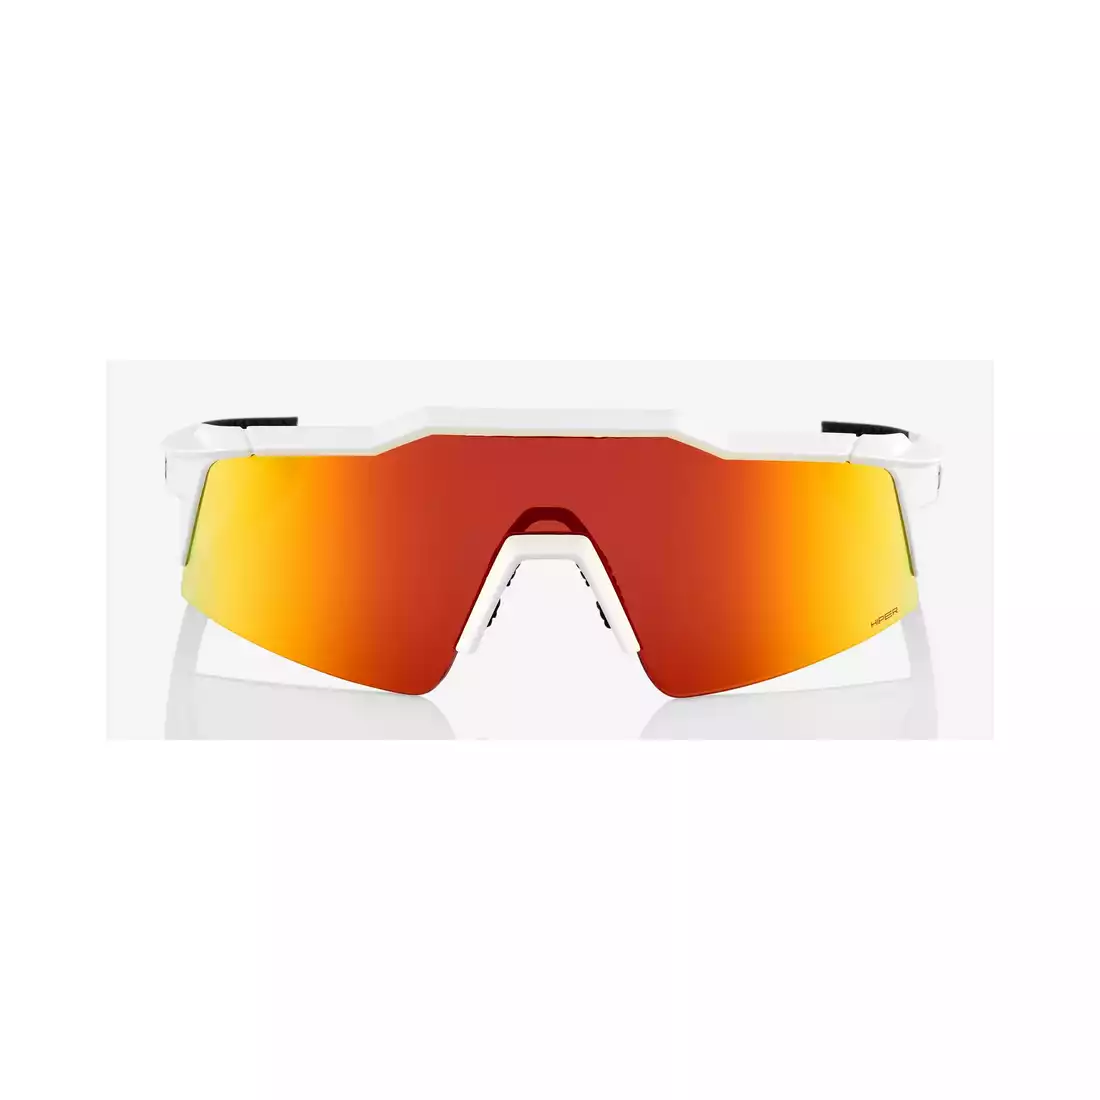 Soft Tact White HiPER Red Mirror Lens 100% S3 Sunglasses 